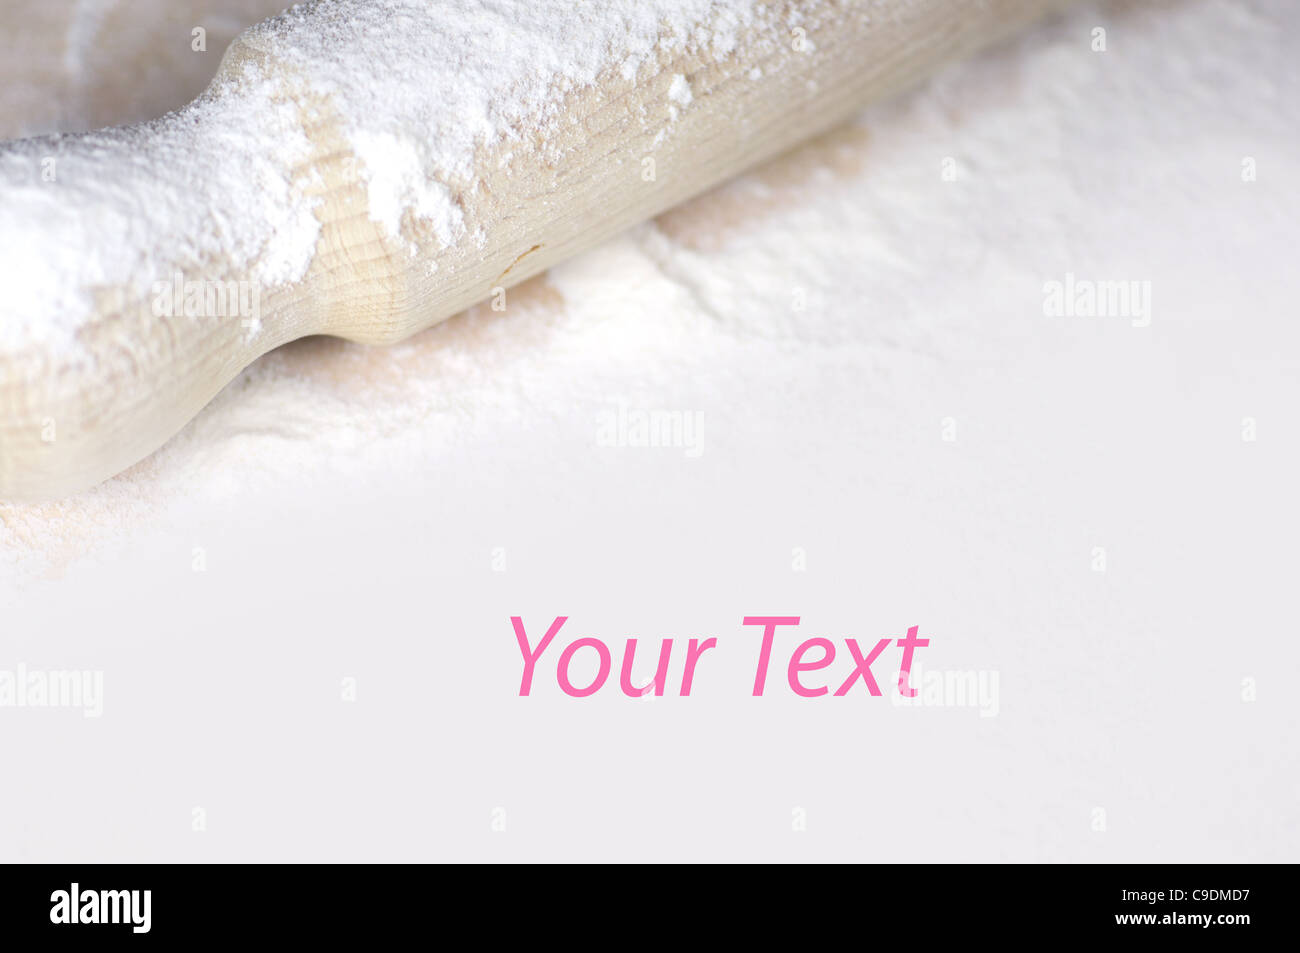 rolling pin with flour Stock Photo